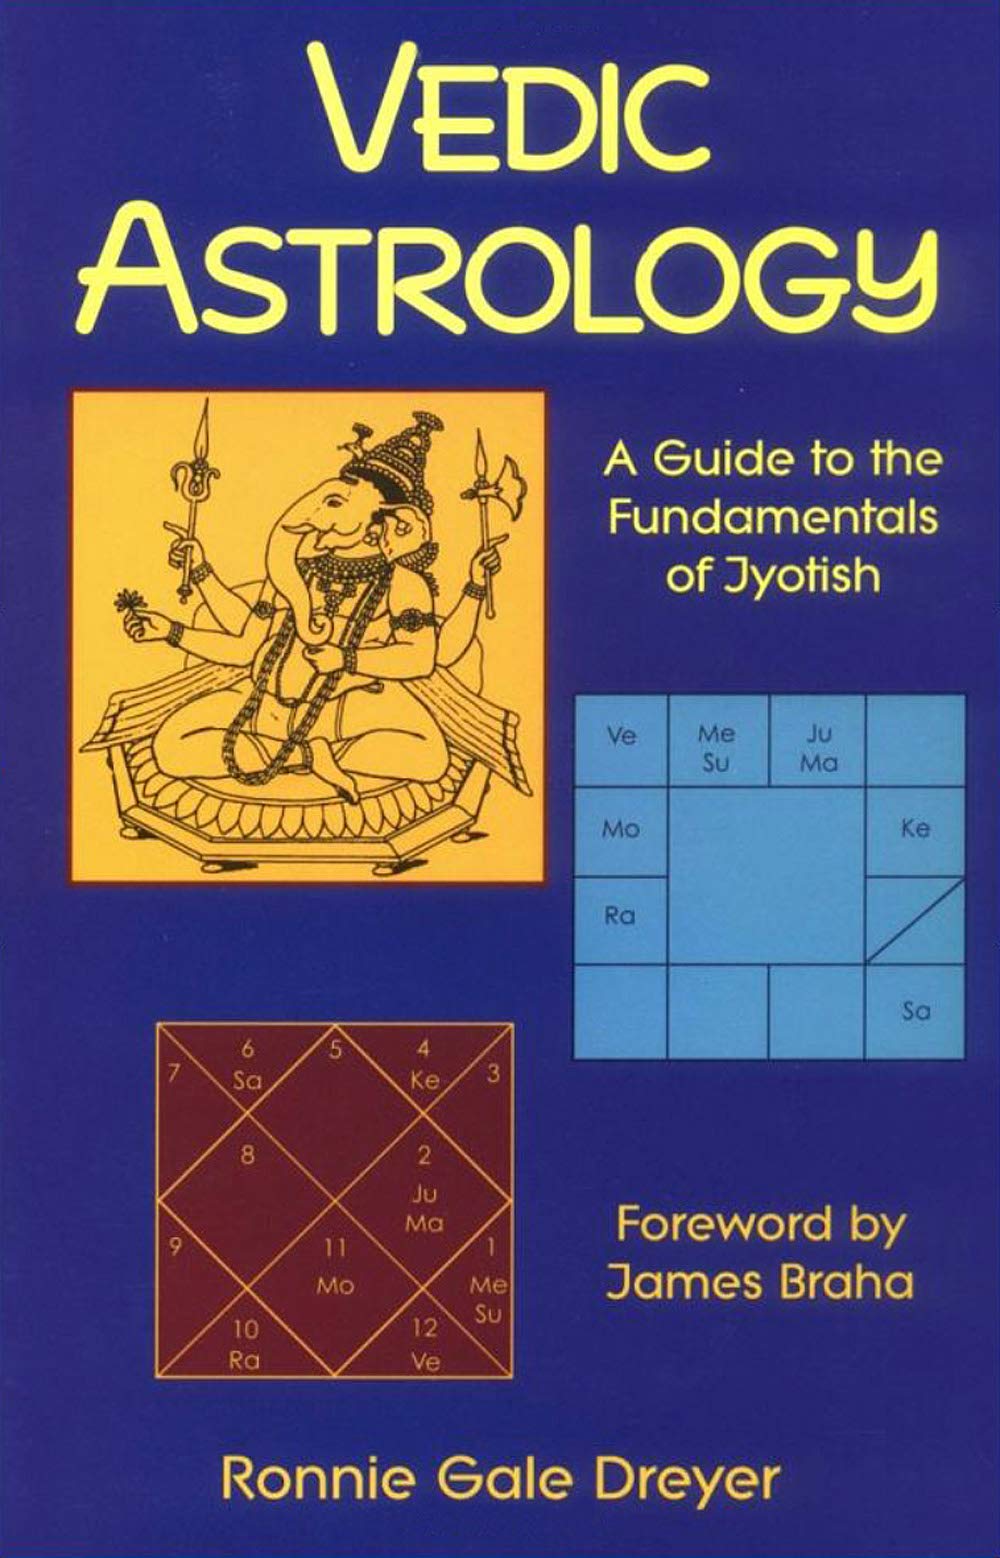 Vedic Astrology: A Guide to the Fundamentals of Jyotish